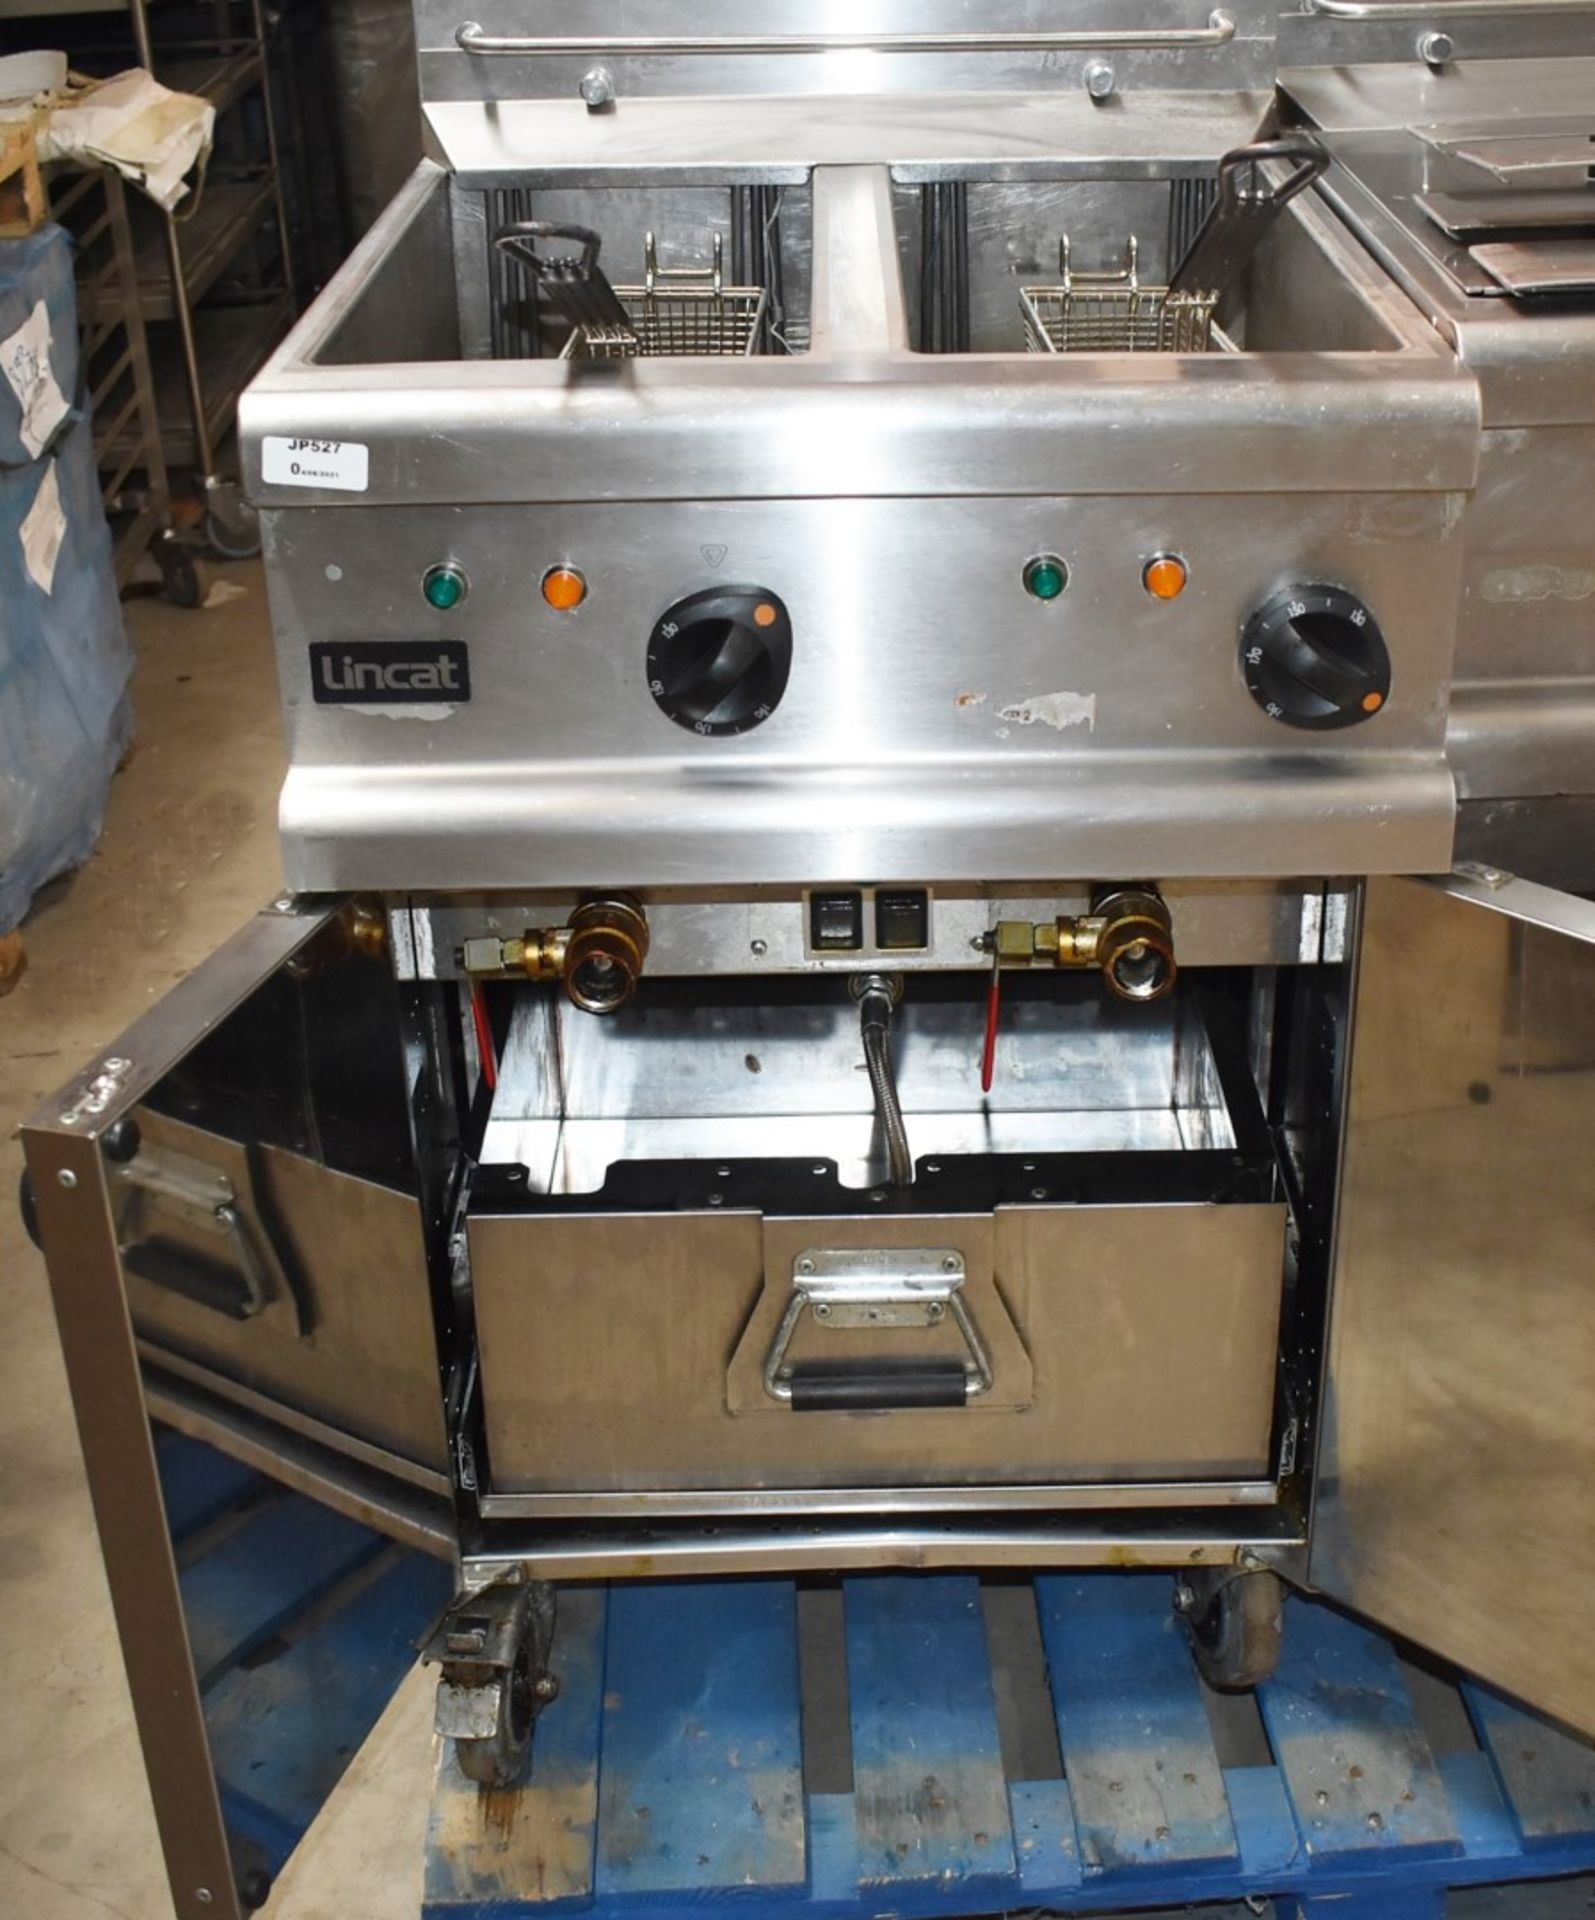 1 x Lincat Opus 700 OE7113 Single Large Tank Electric Fryer With Built In Filteration - 240V / 3PH - Image 7 of 14